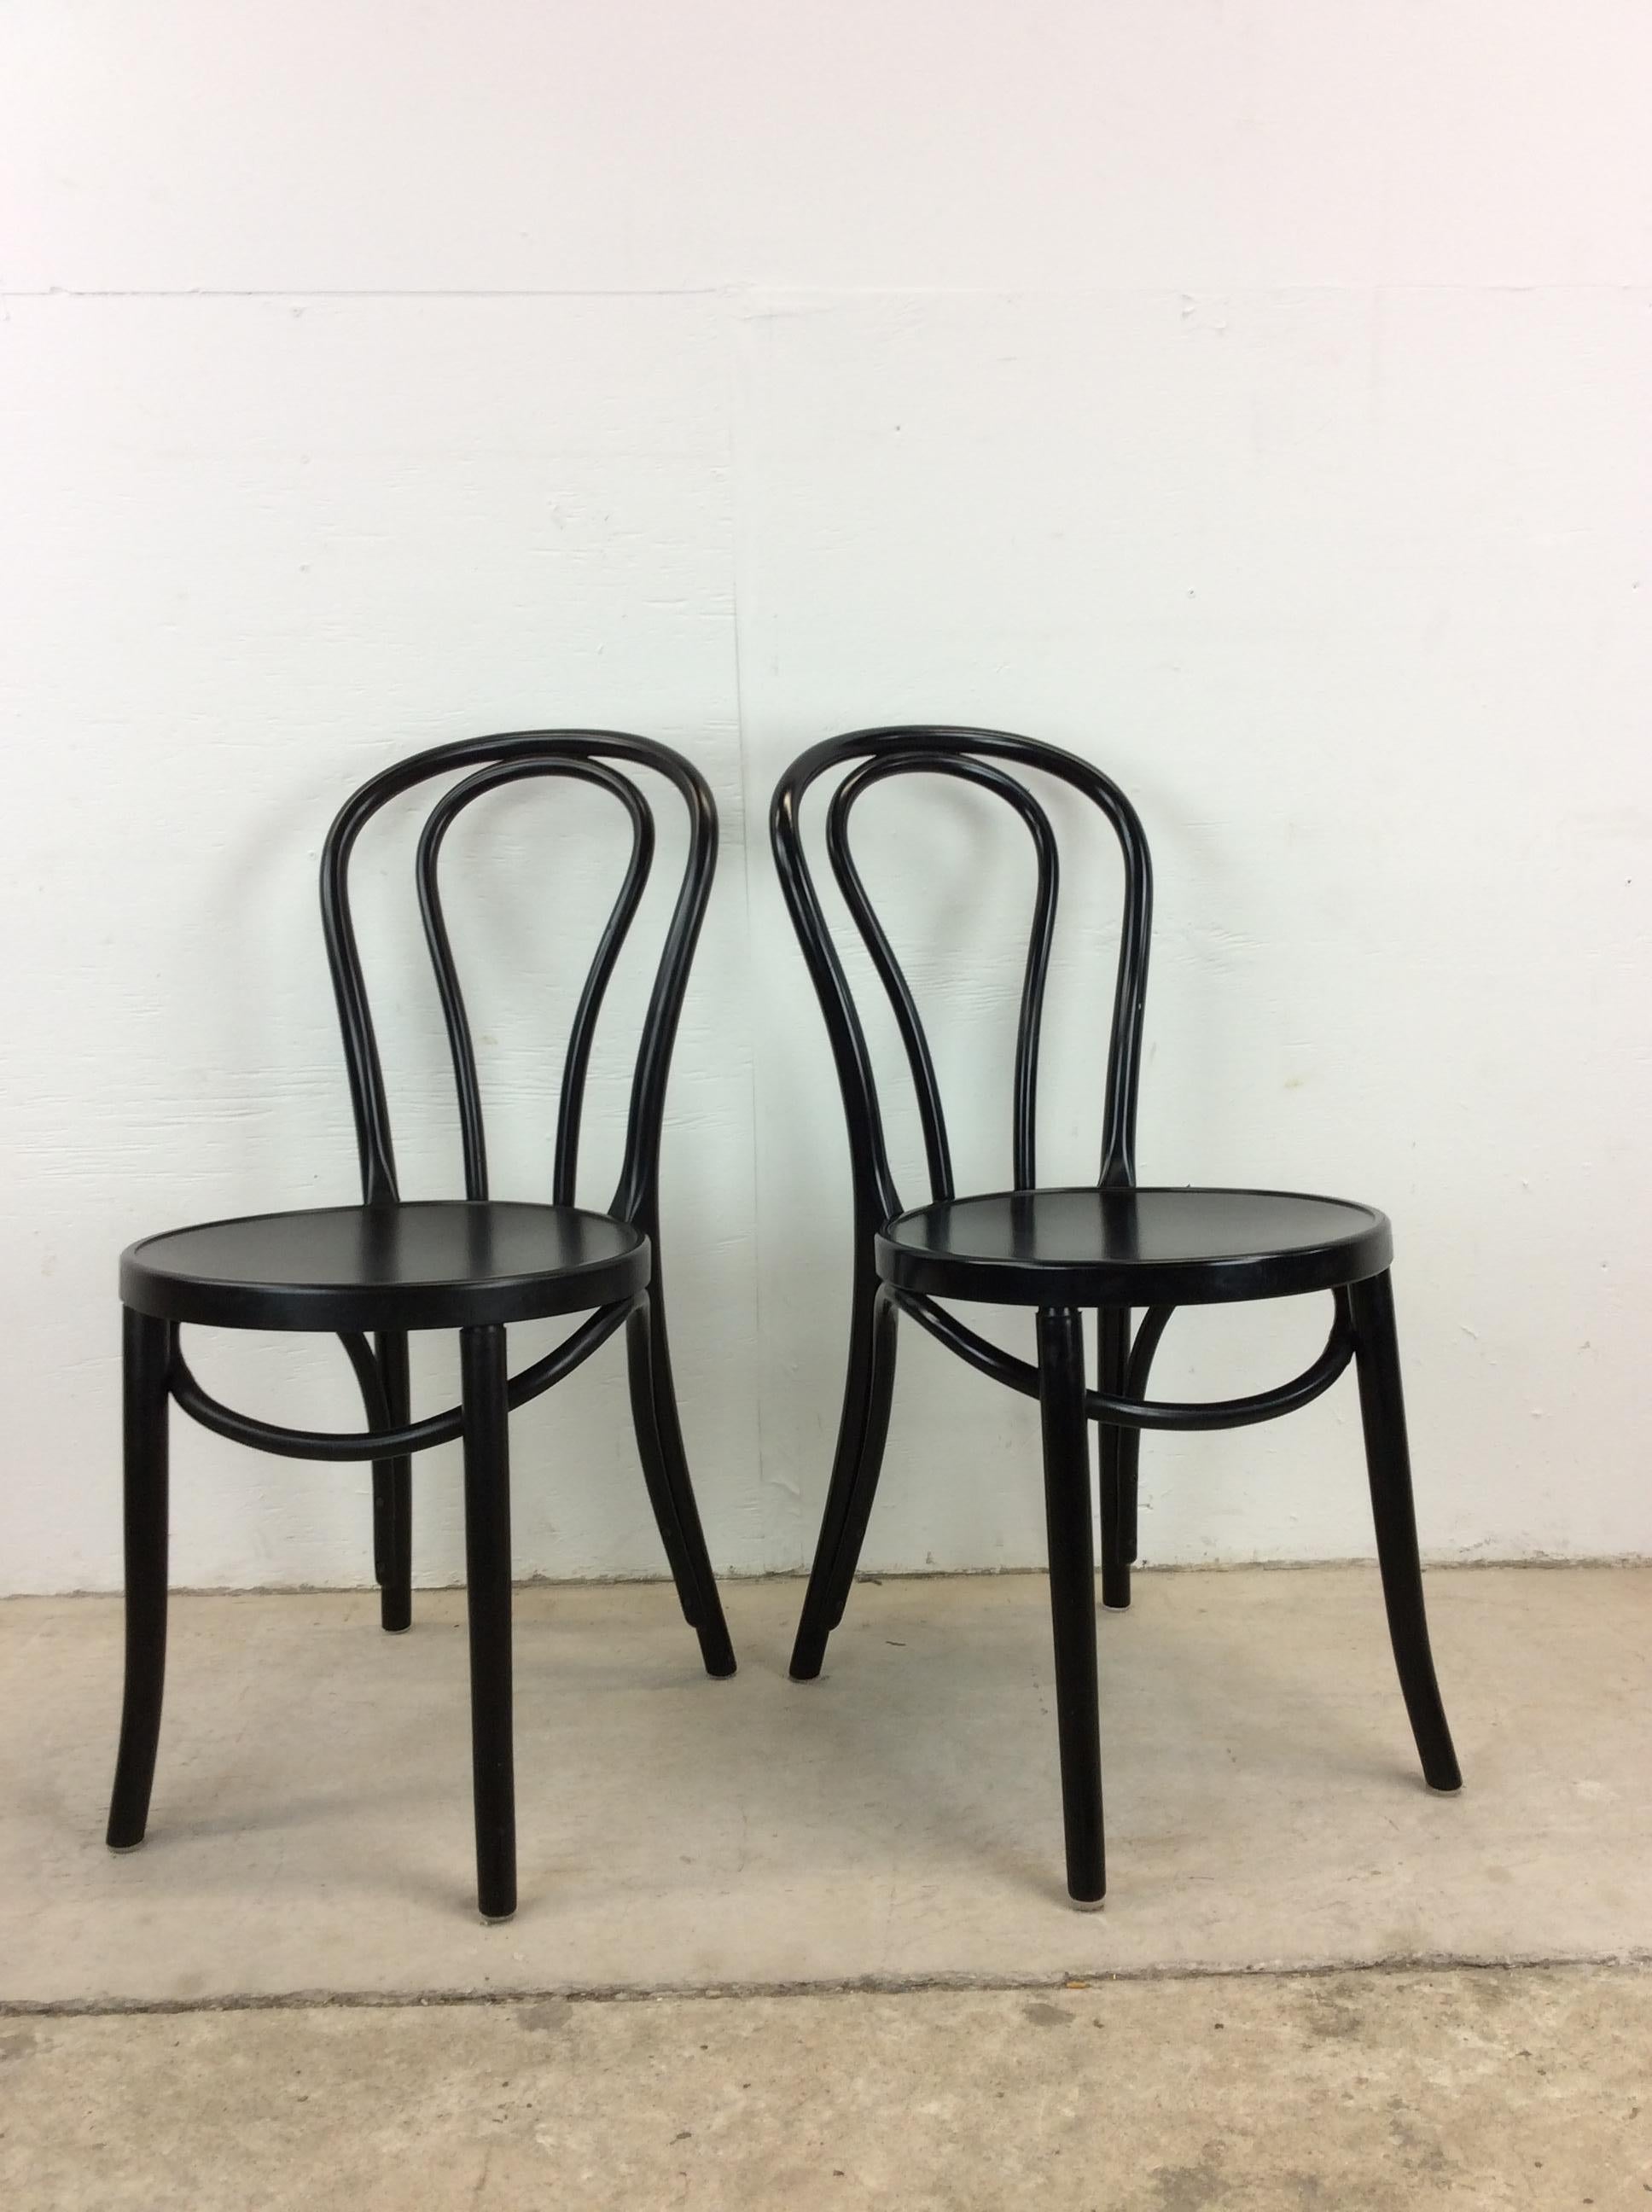 Set of 4 Vintage IKEA Black Cafe Style Chairs 1